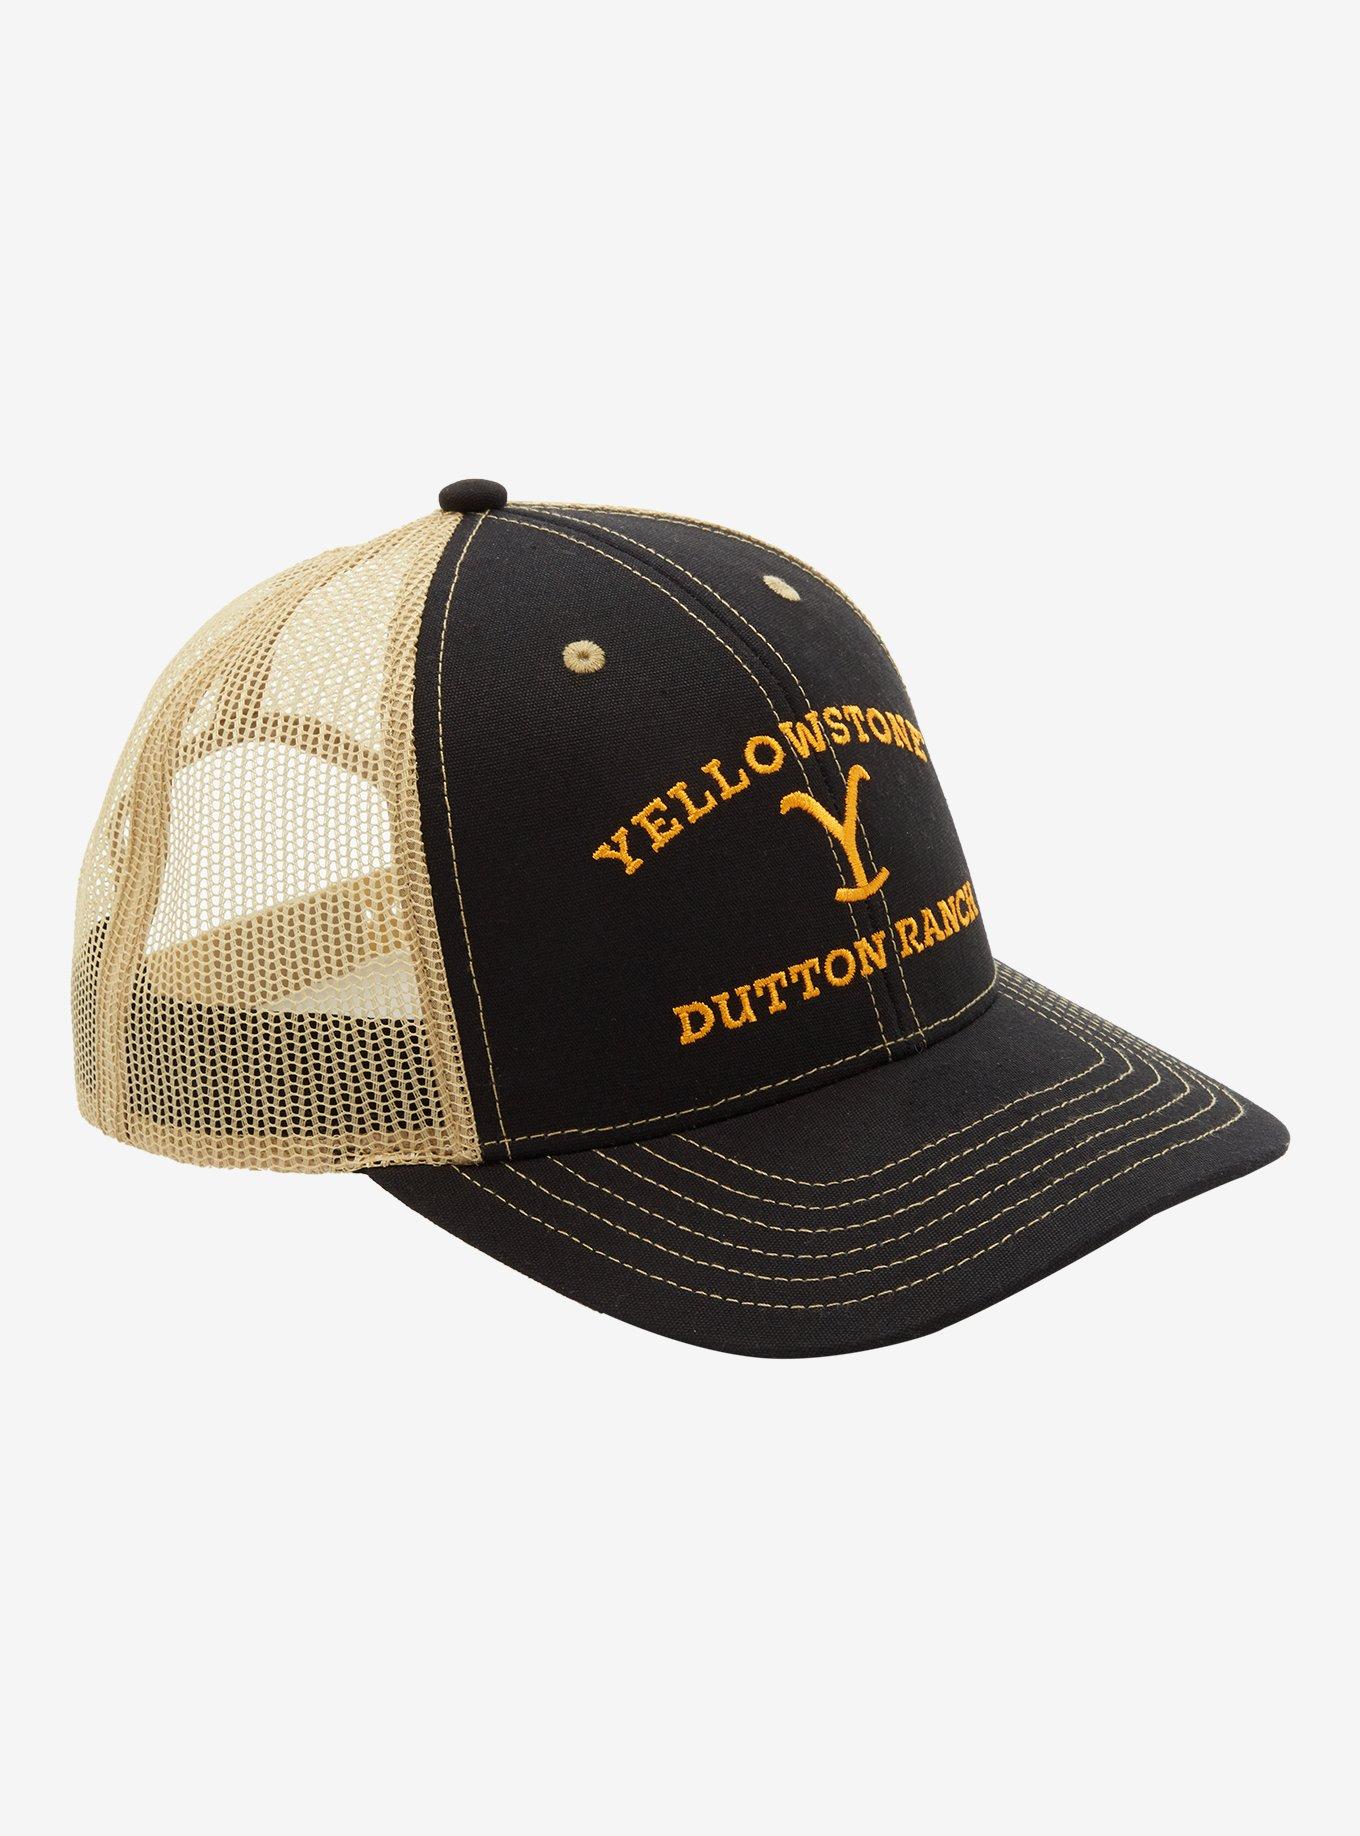 | Dutton Ranch Logo Hat Embroidered Yellowstone Trucker Topic Hot